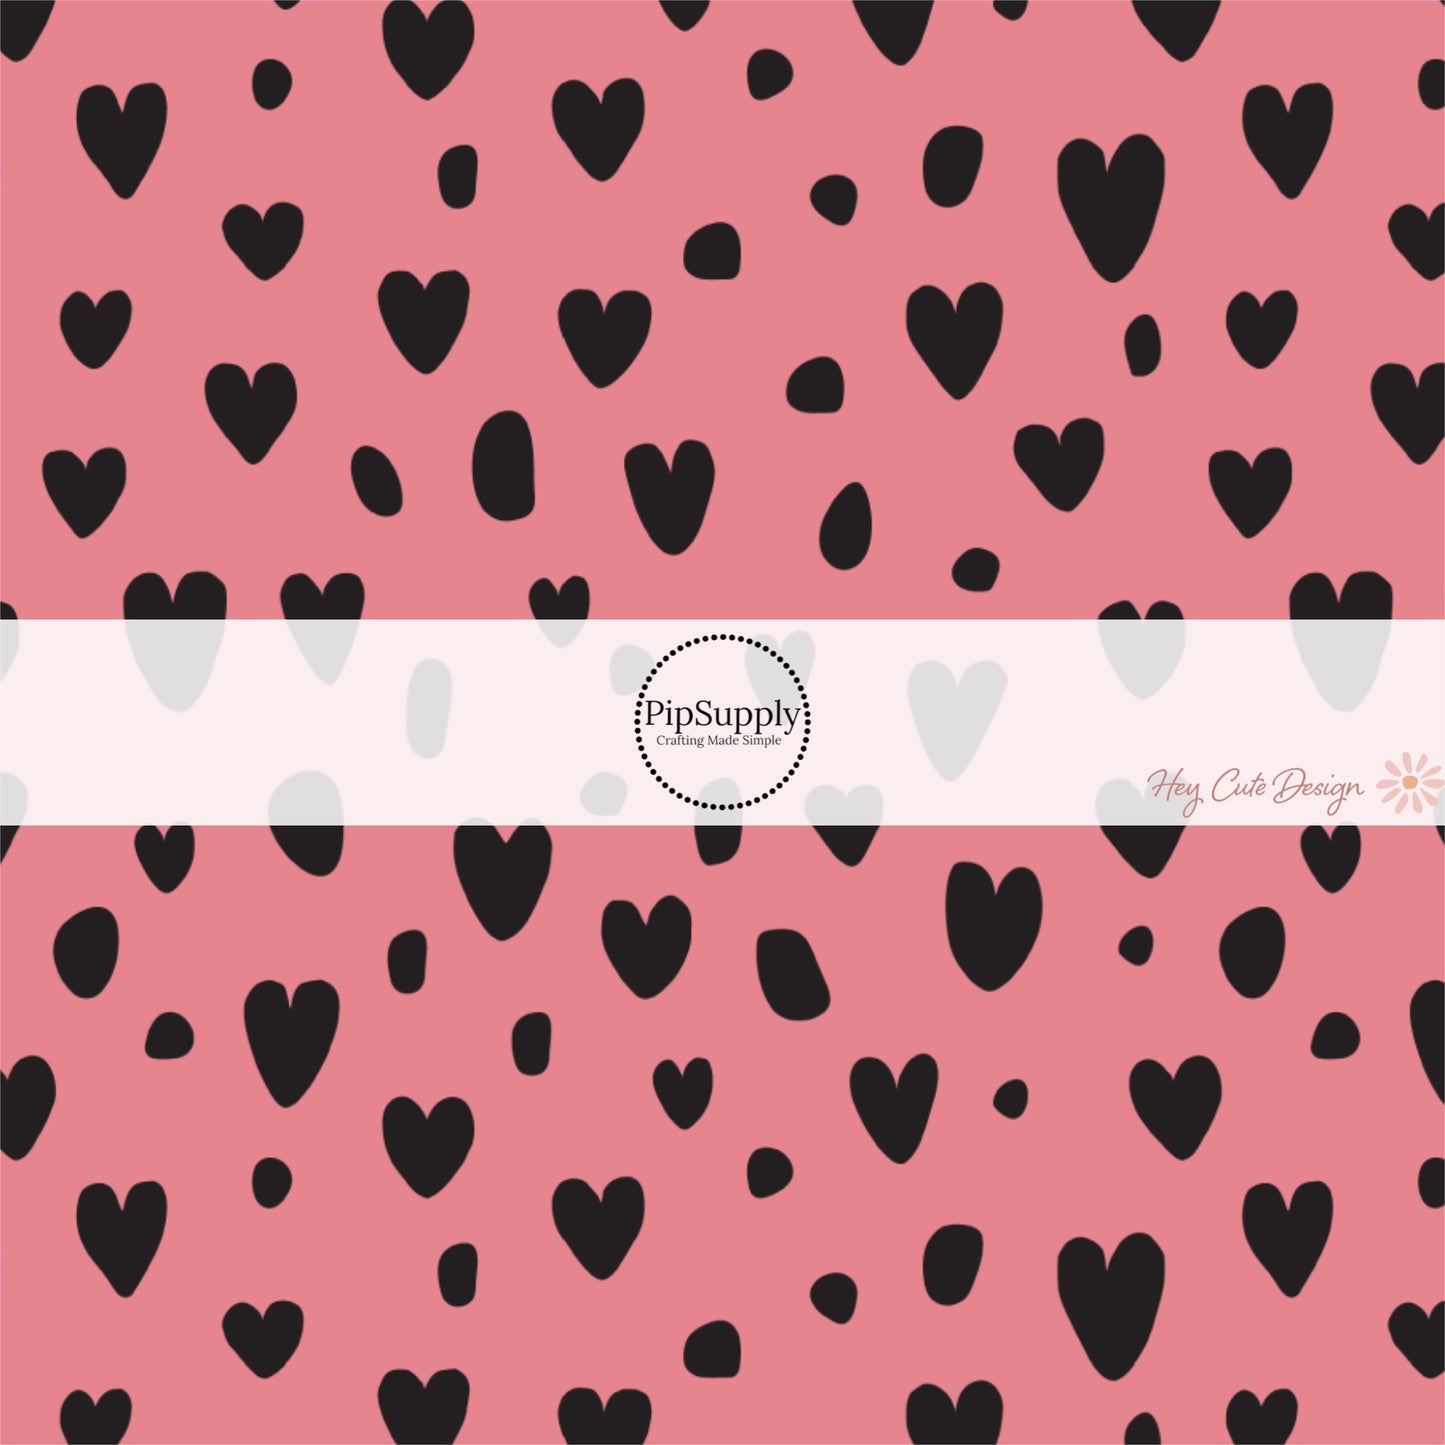 These heart and spot themed pink fabric by the yard features leopard pattern with hearts and spots in black on pink. This fun animal themed fabric can be used for all your sewing and crafting needs! 